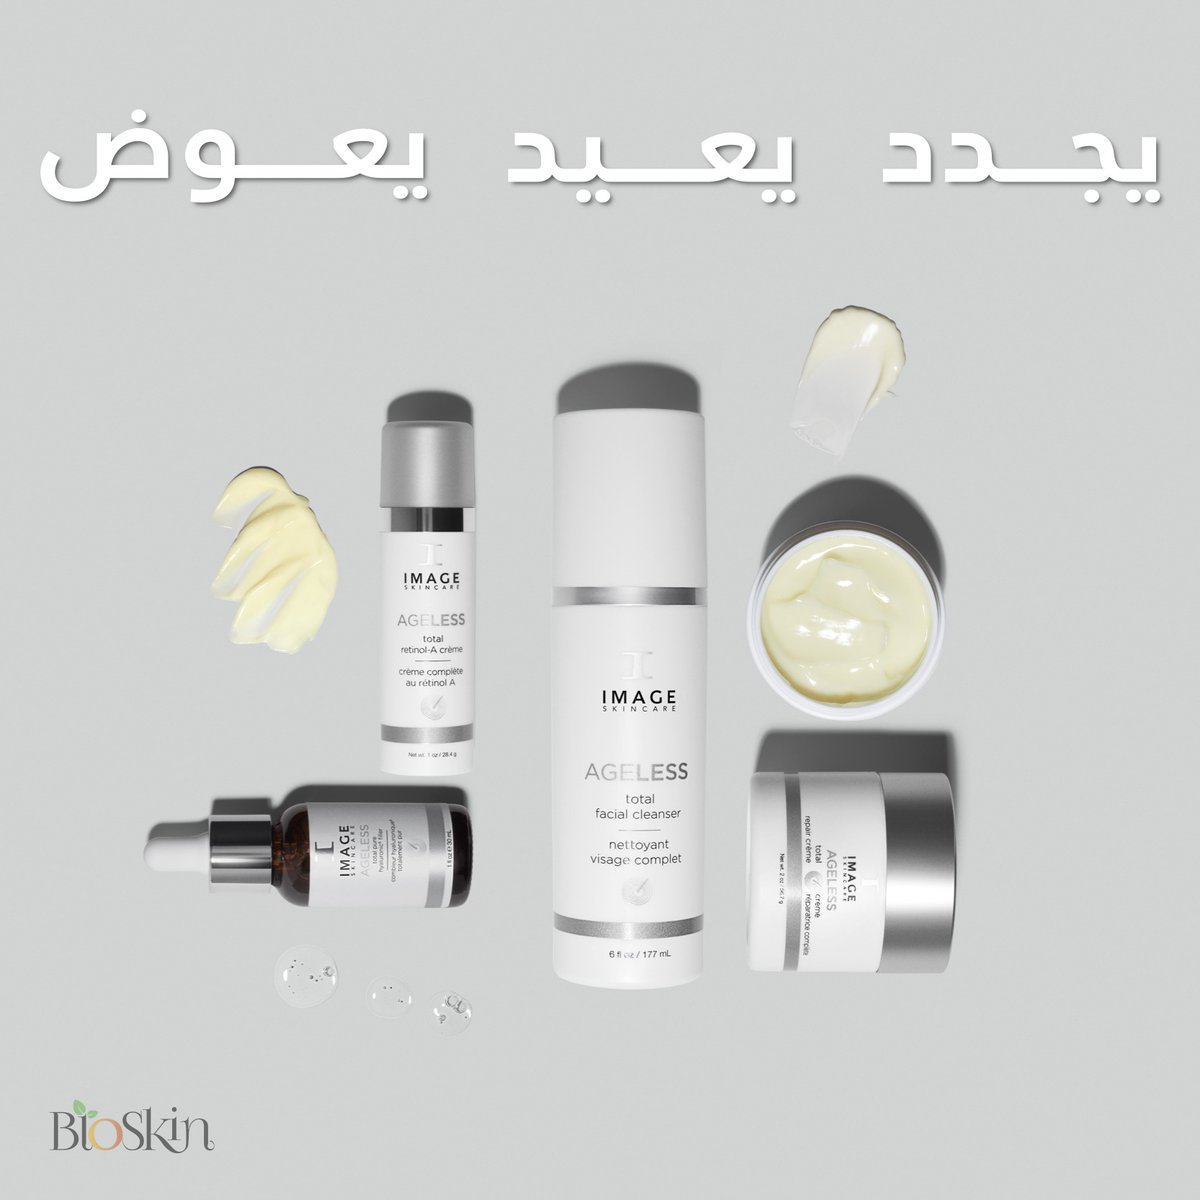 🕗🌟 Say goodbye to wrinkles, fine lines, aging and uneven skin tone with the AGELESS collection! Helps to REPLENISHING, RENEWING, REWINDING Your skin and the Vectorize Technology releases encapsulated key ingredients to support prolonged effectiveness.  #agelessaging